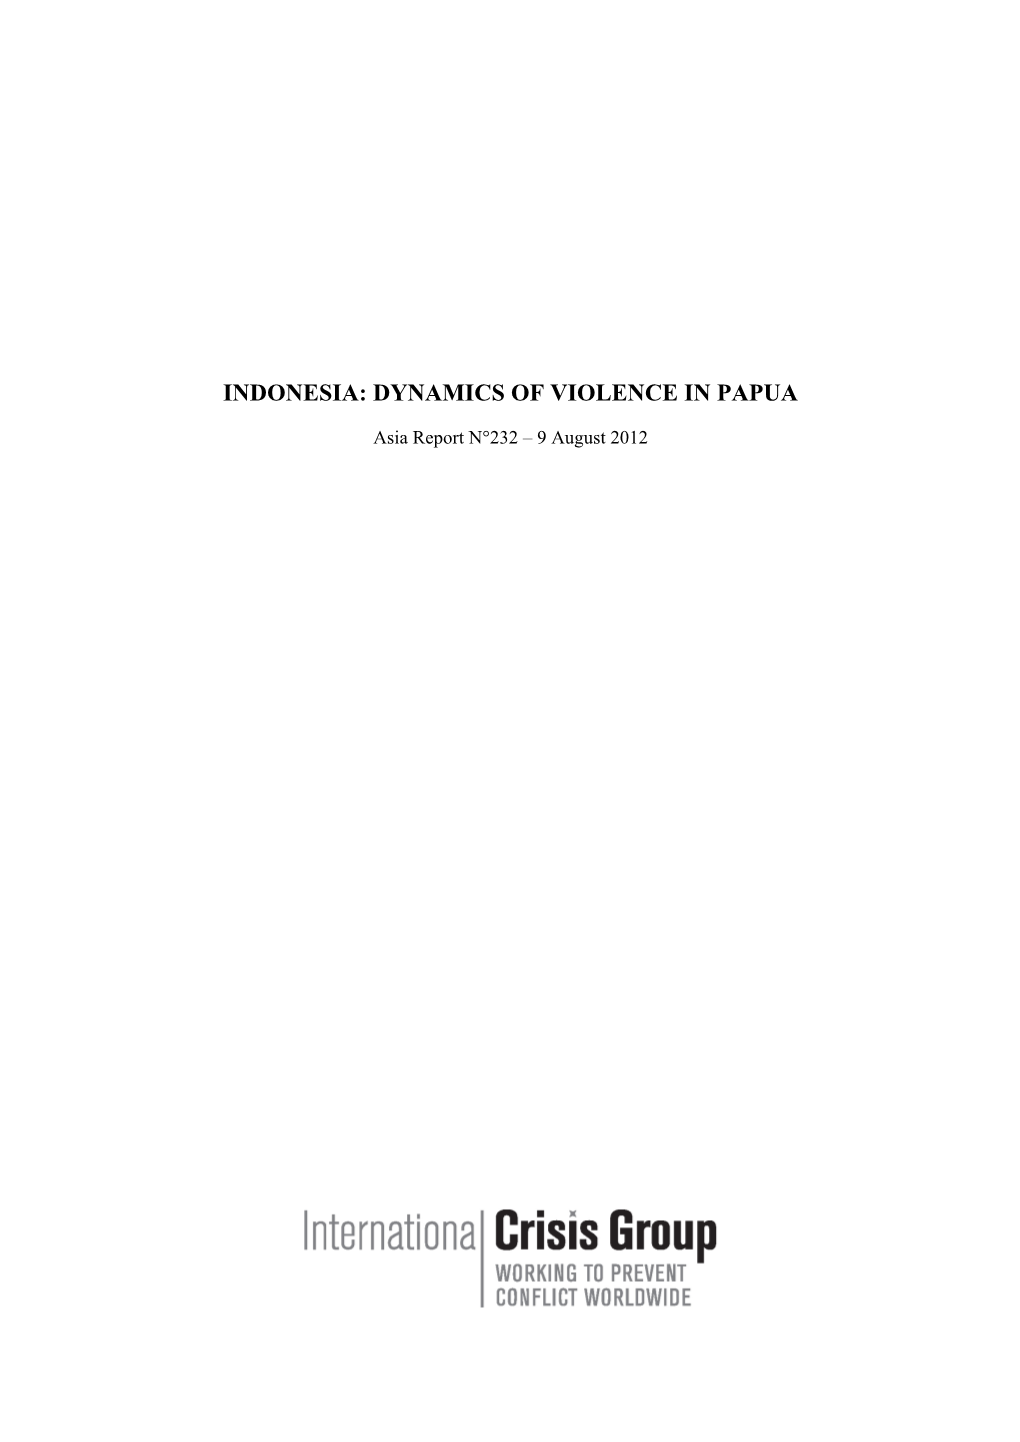 Indonesia: Dynamics of Violence in Papua